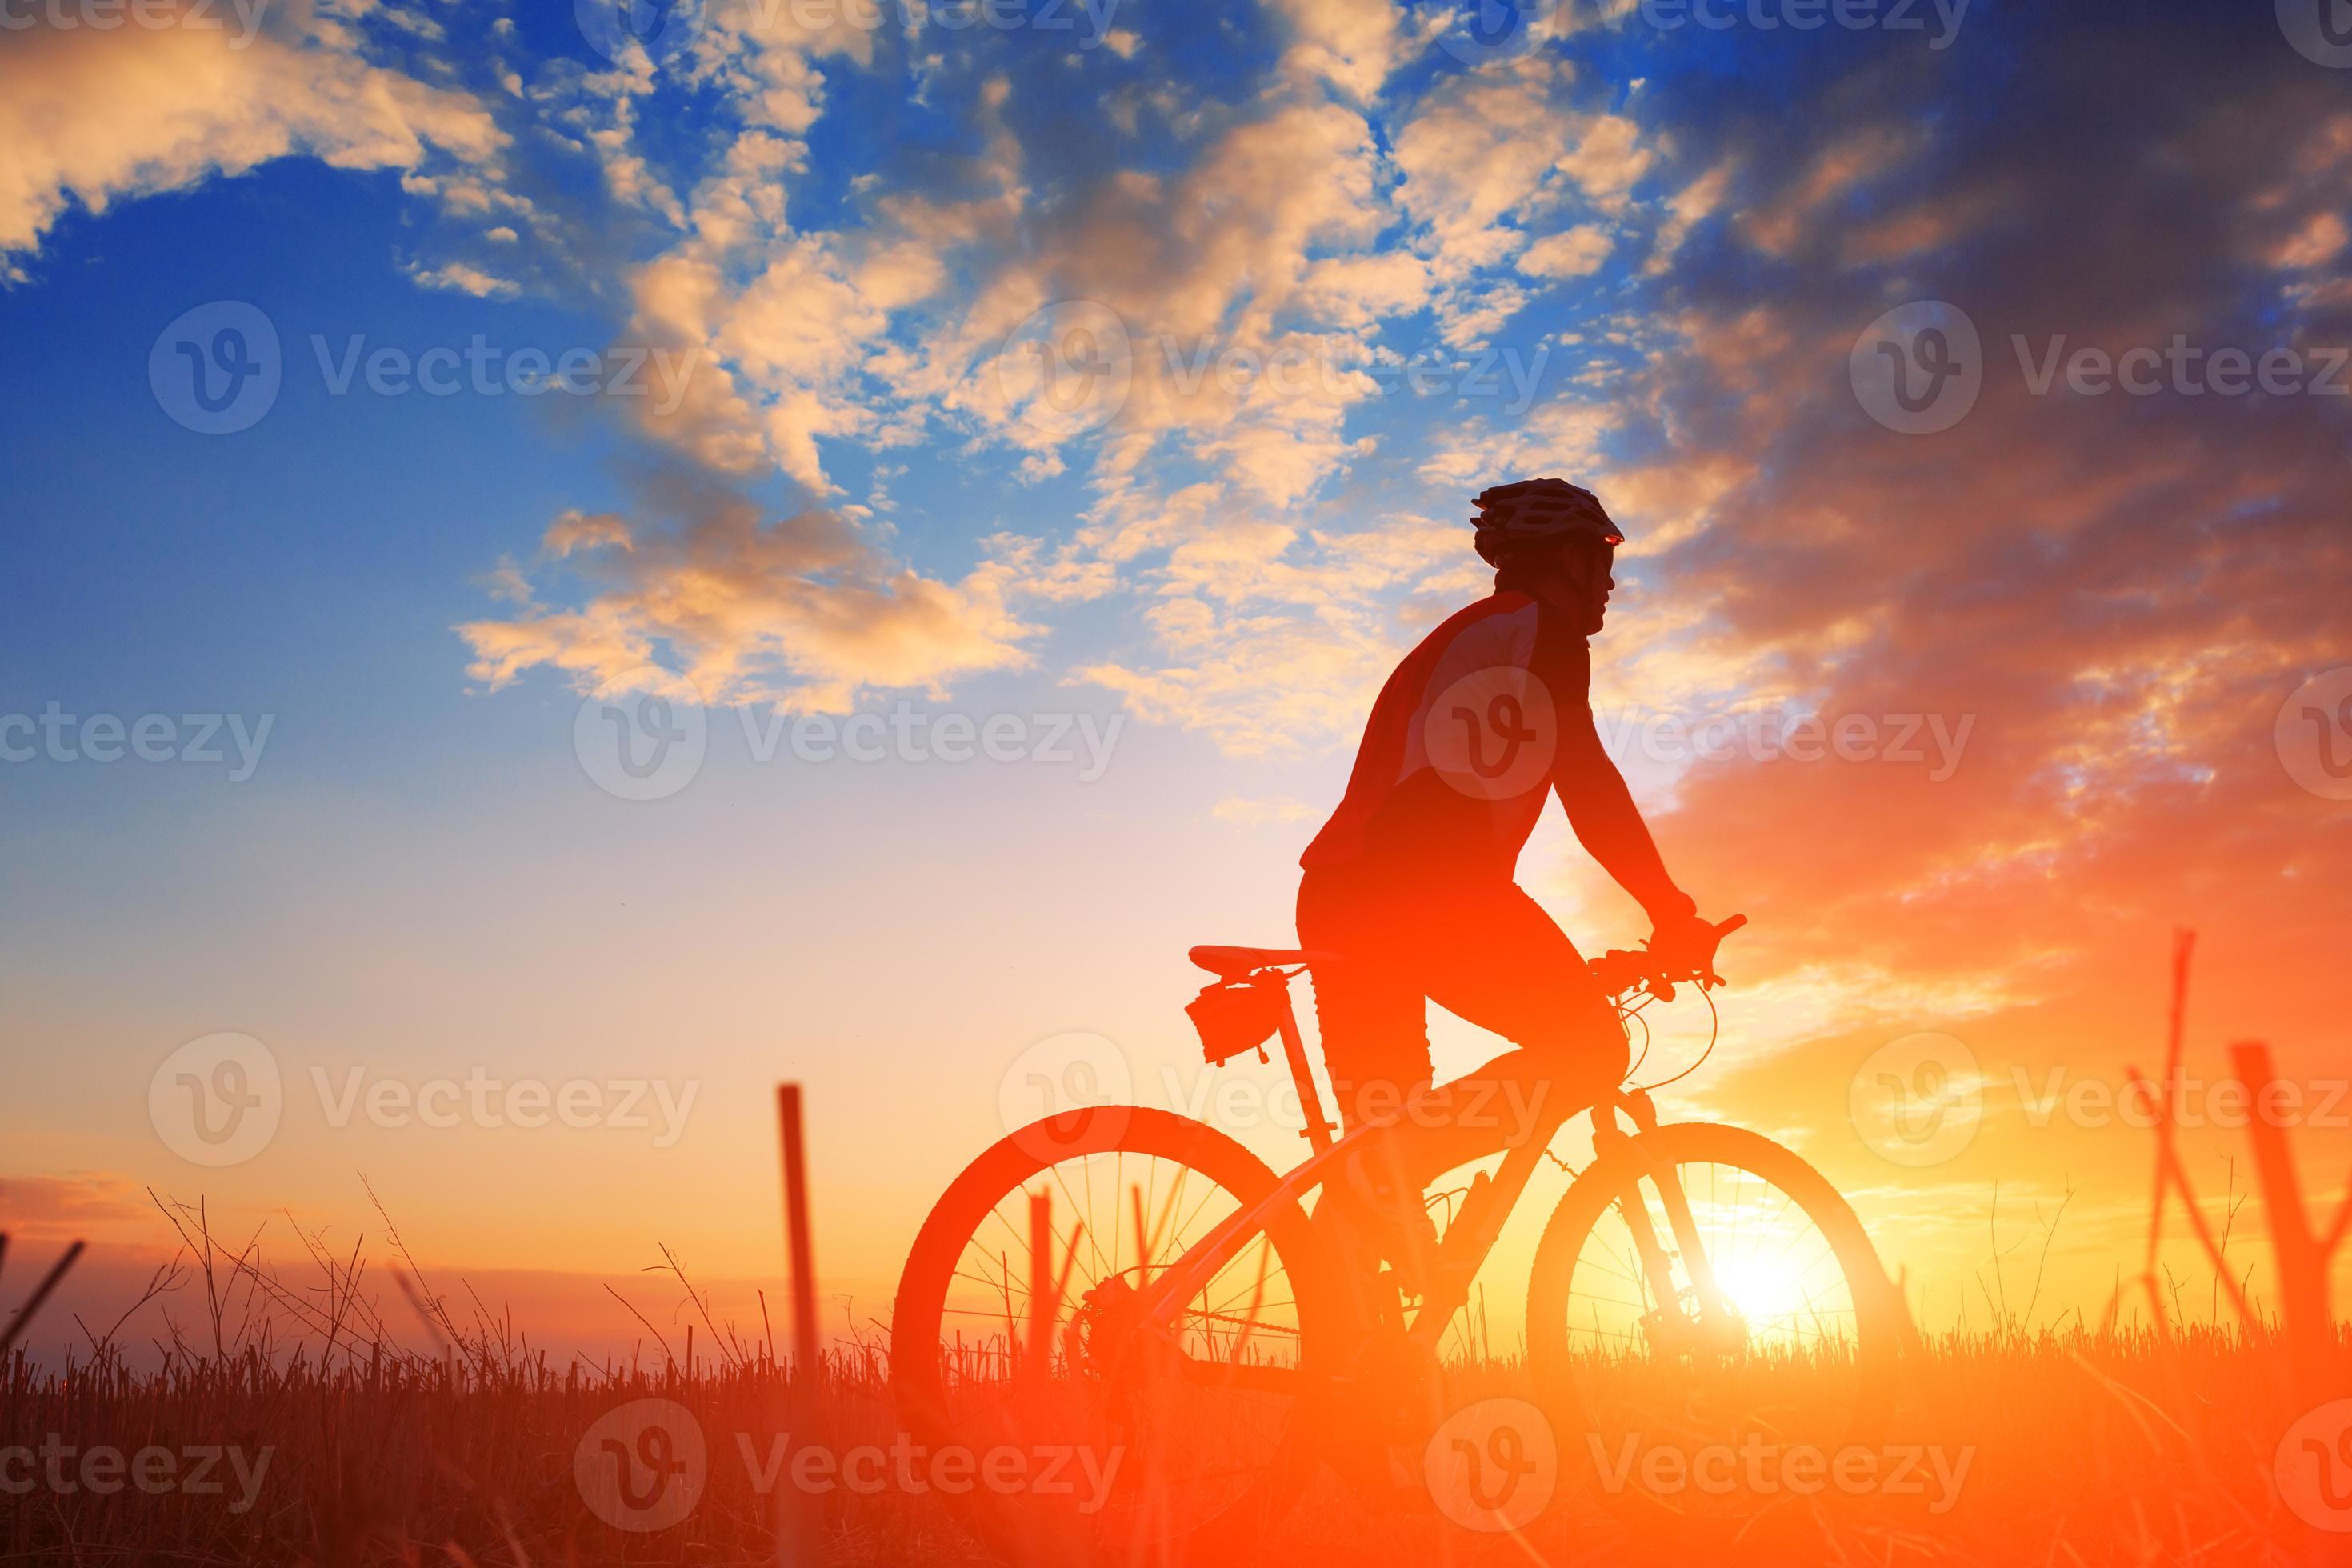 Silhouette of a biker and bicycle on sunset background. 824722 Stock Photo  at Vecteezy